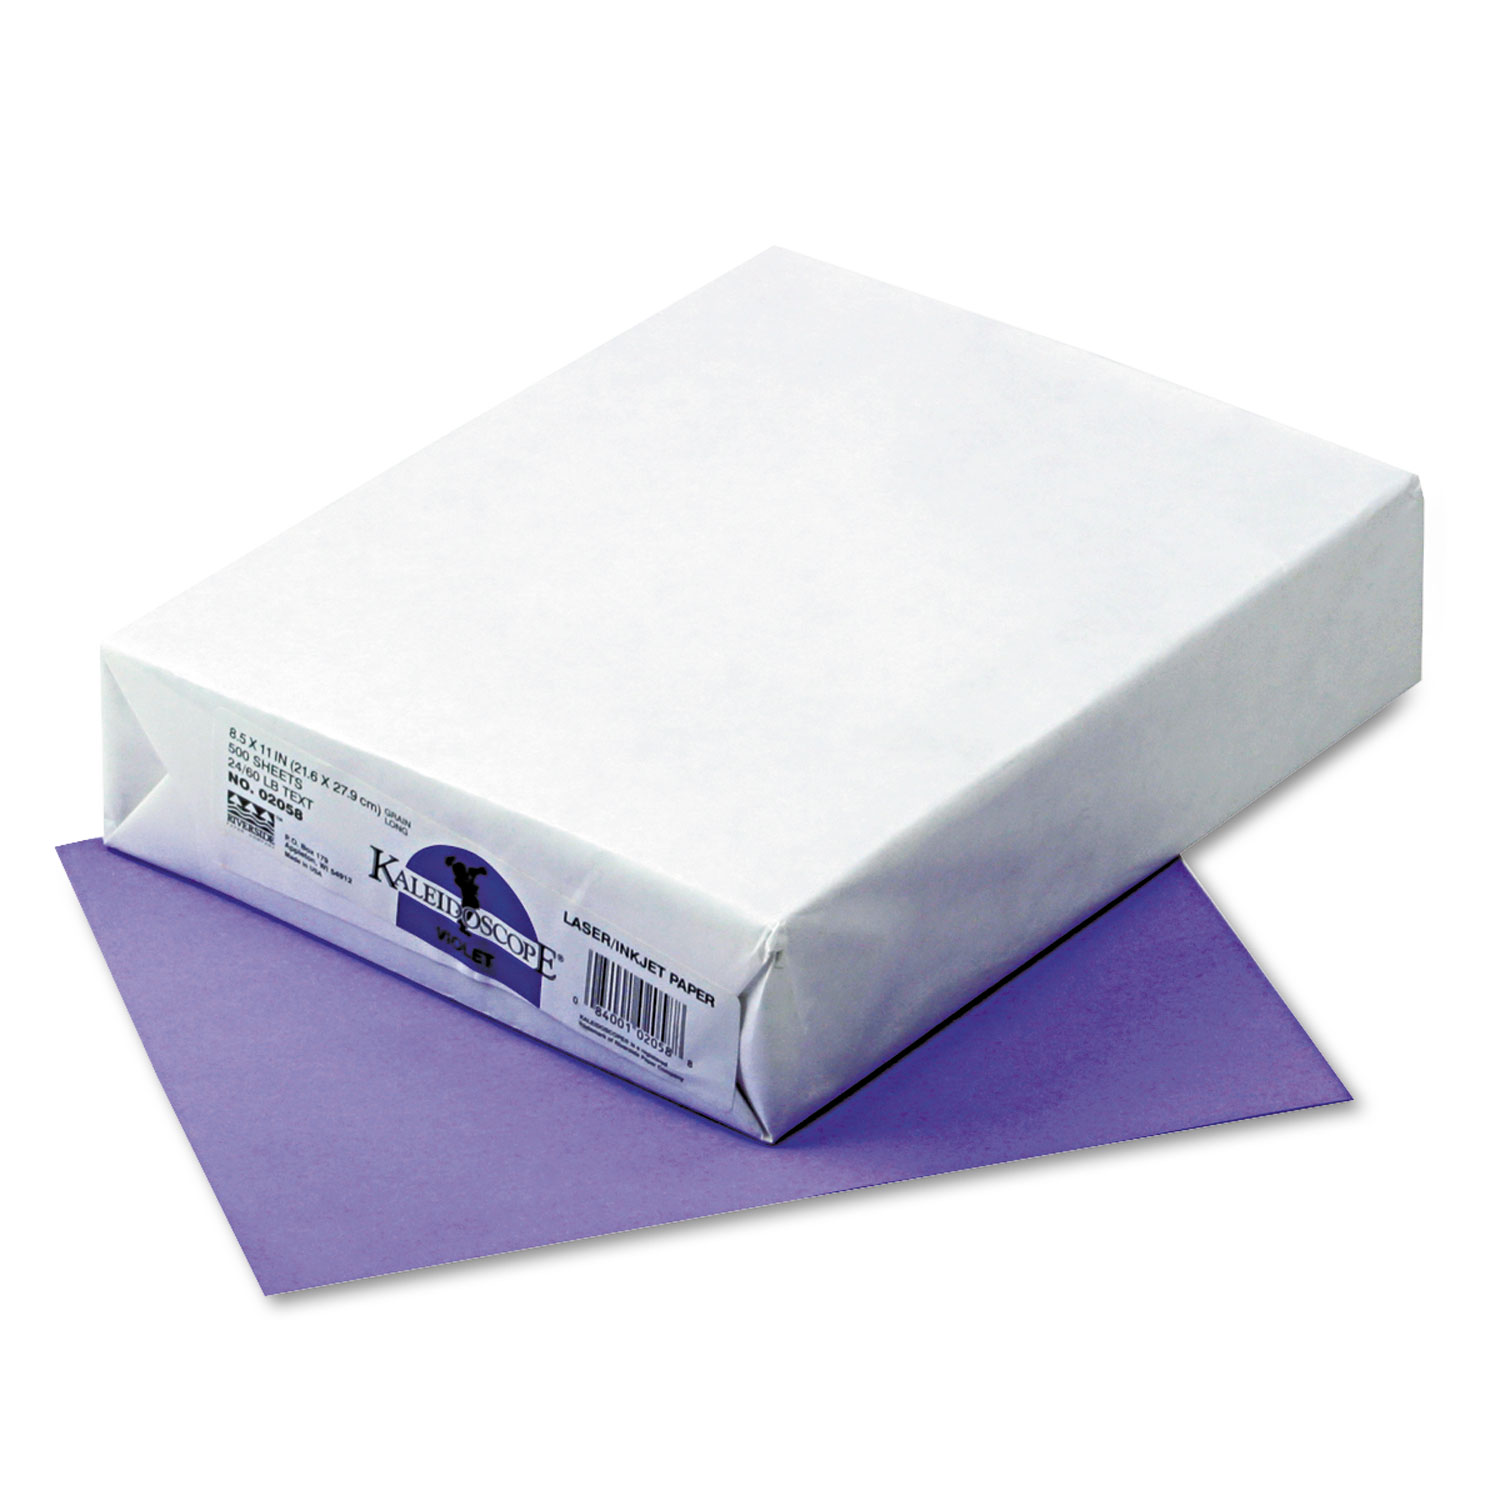  Pacon 102058 Kaleidoscope Multipurpose Colored Paper, 24lb, 8.5 x 11, Violet, 500/Ream (PAC102058) 